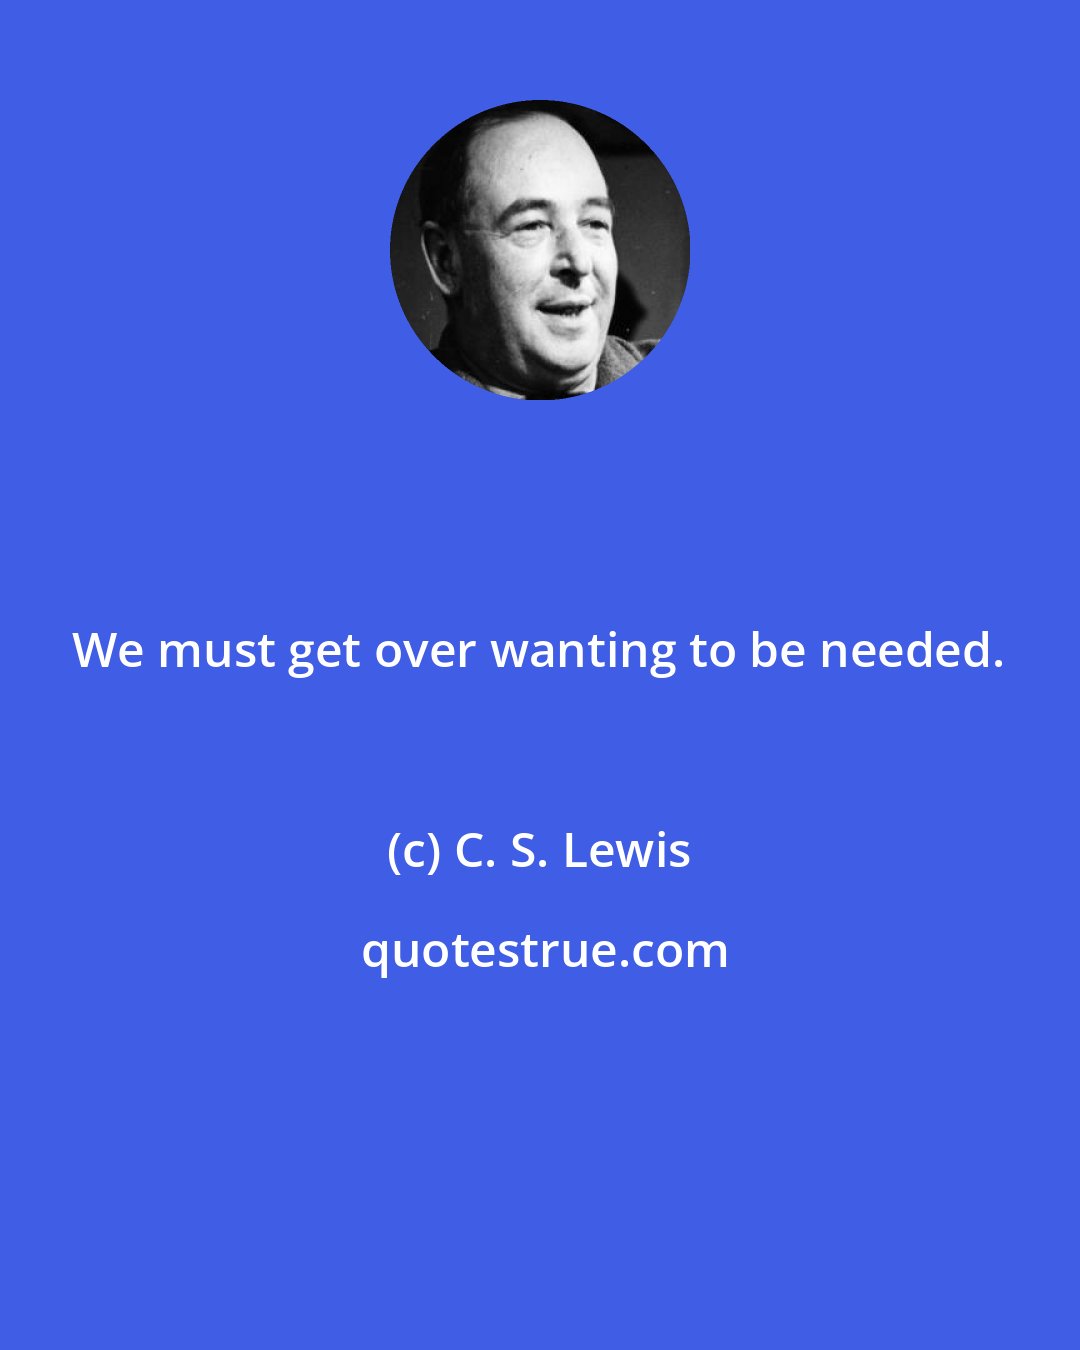 C. S. Lewis: We must get over wanting to be needed.